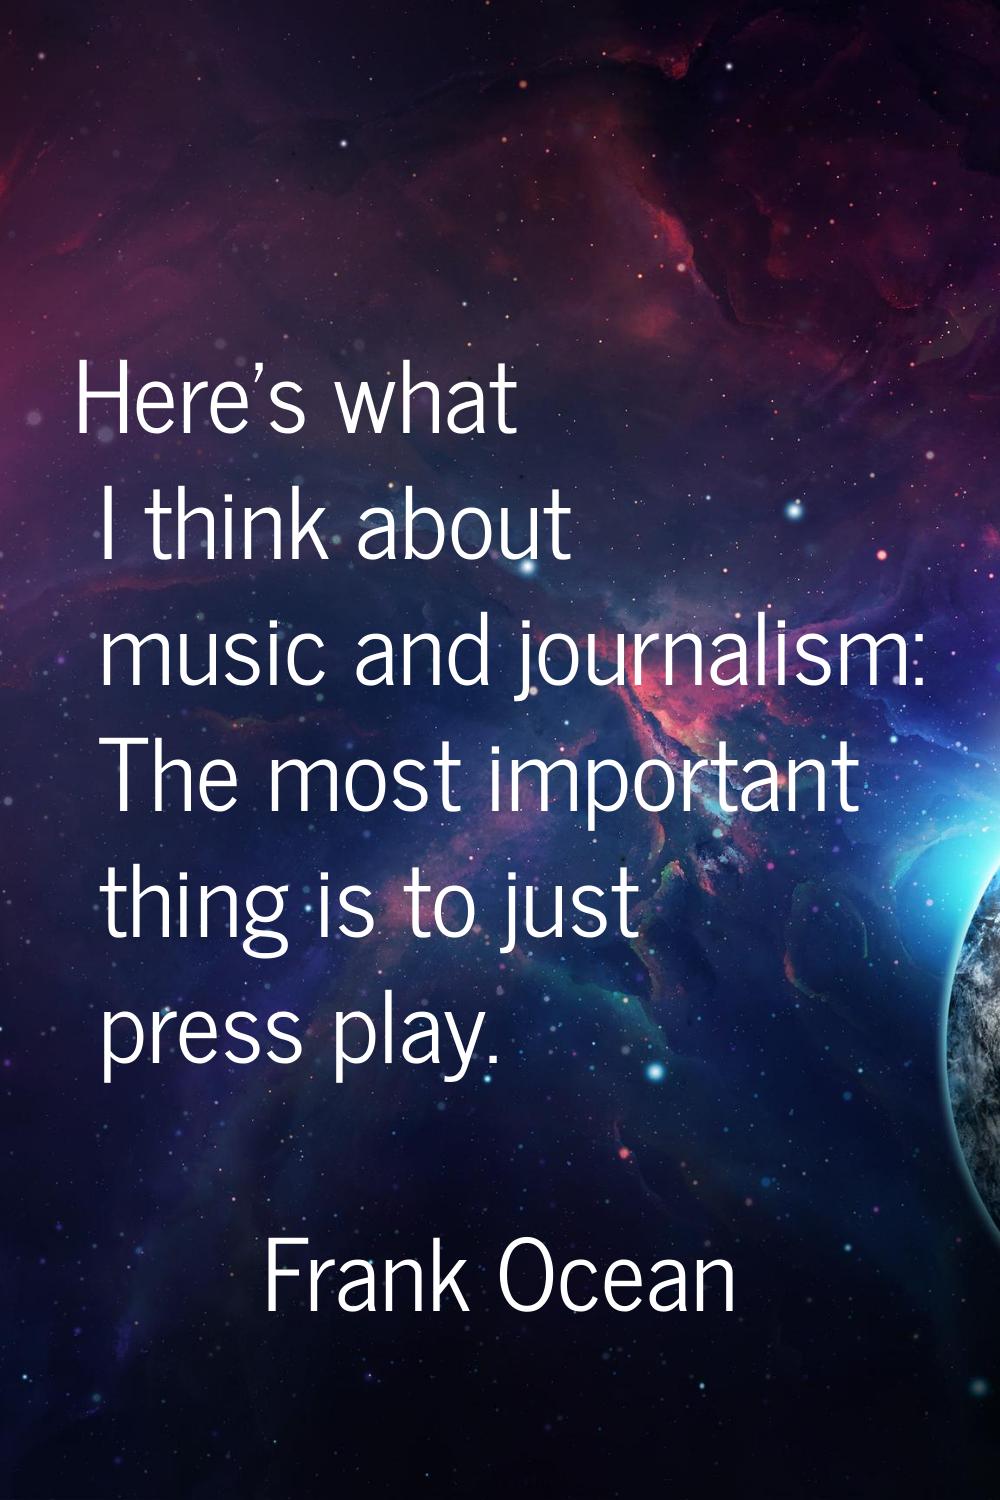 Here's what I think about music and journalism: The most important thing is to just press play.